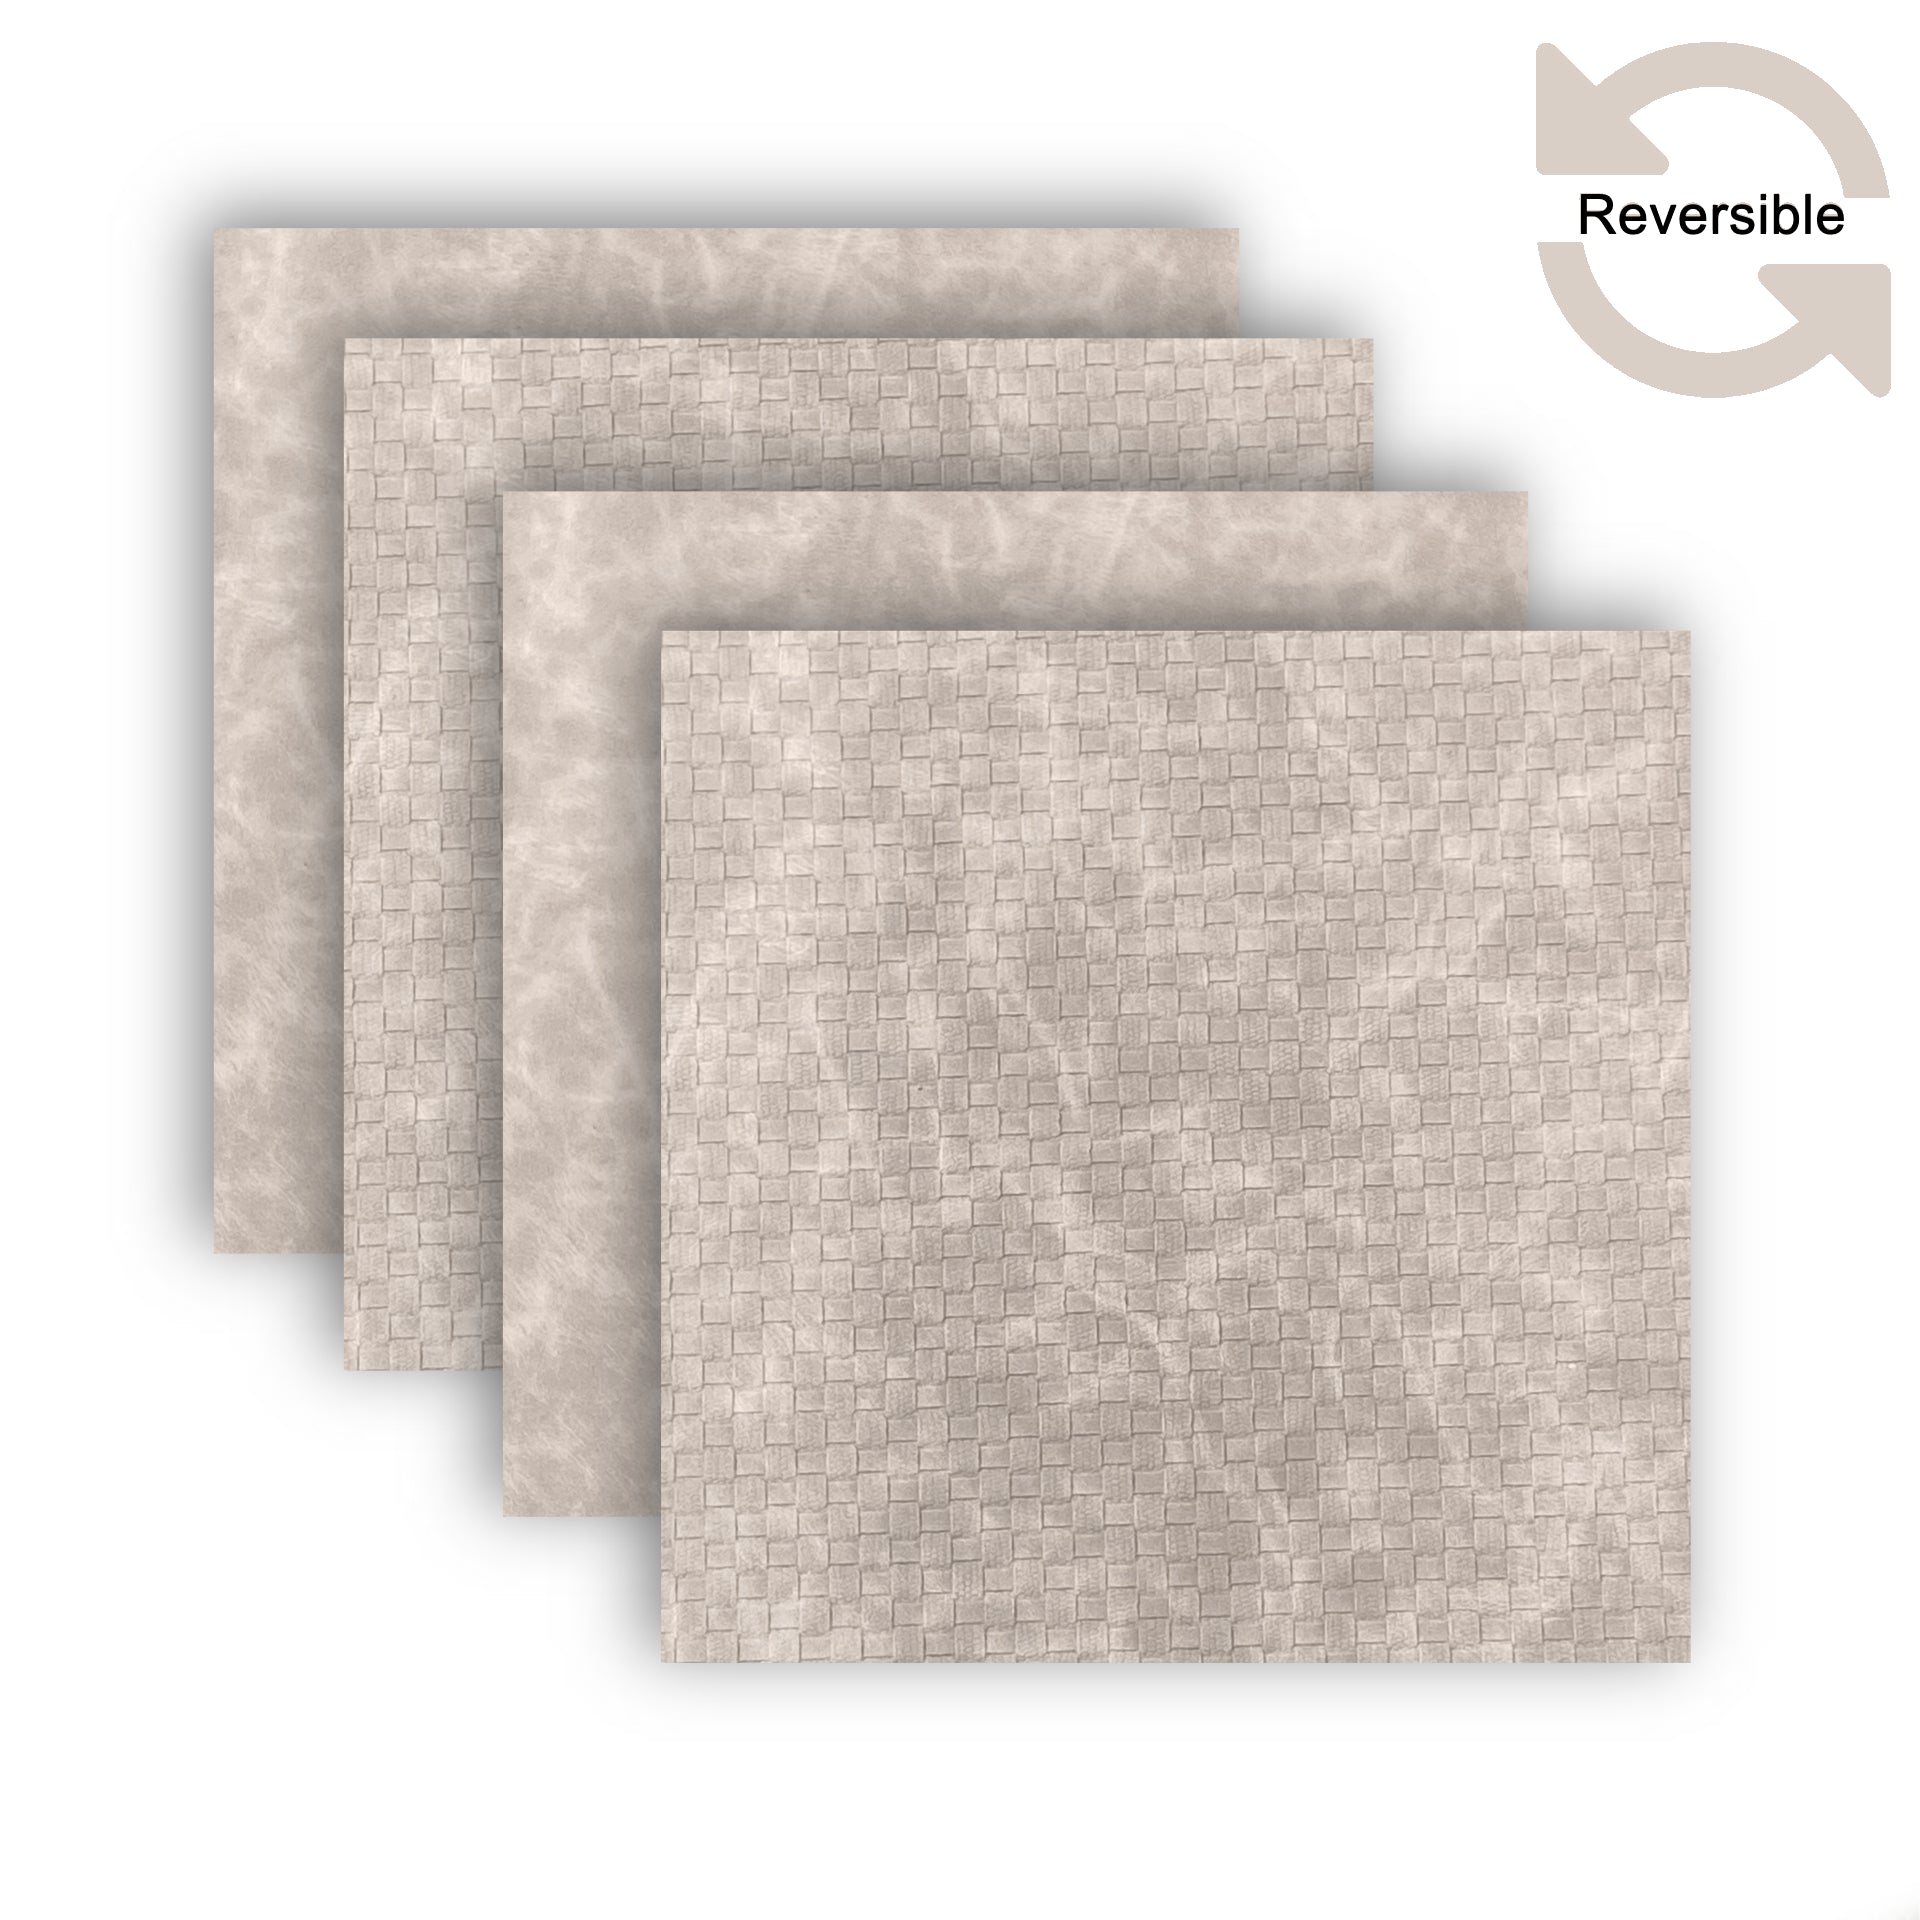 Dainty Home Sorento Faux Leather Reversible 2 Pattern 15" x 15" Square Placemat Set Of 4